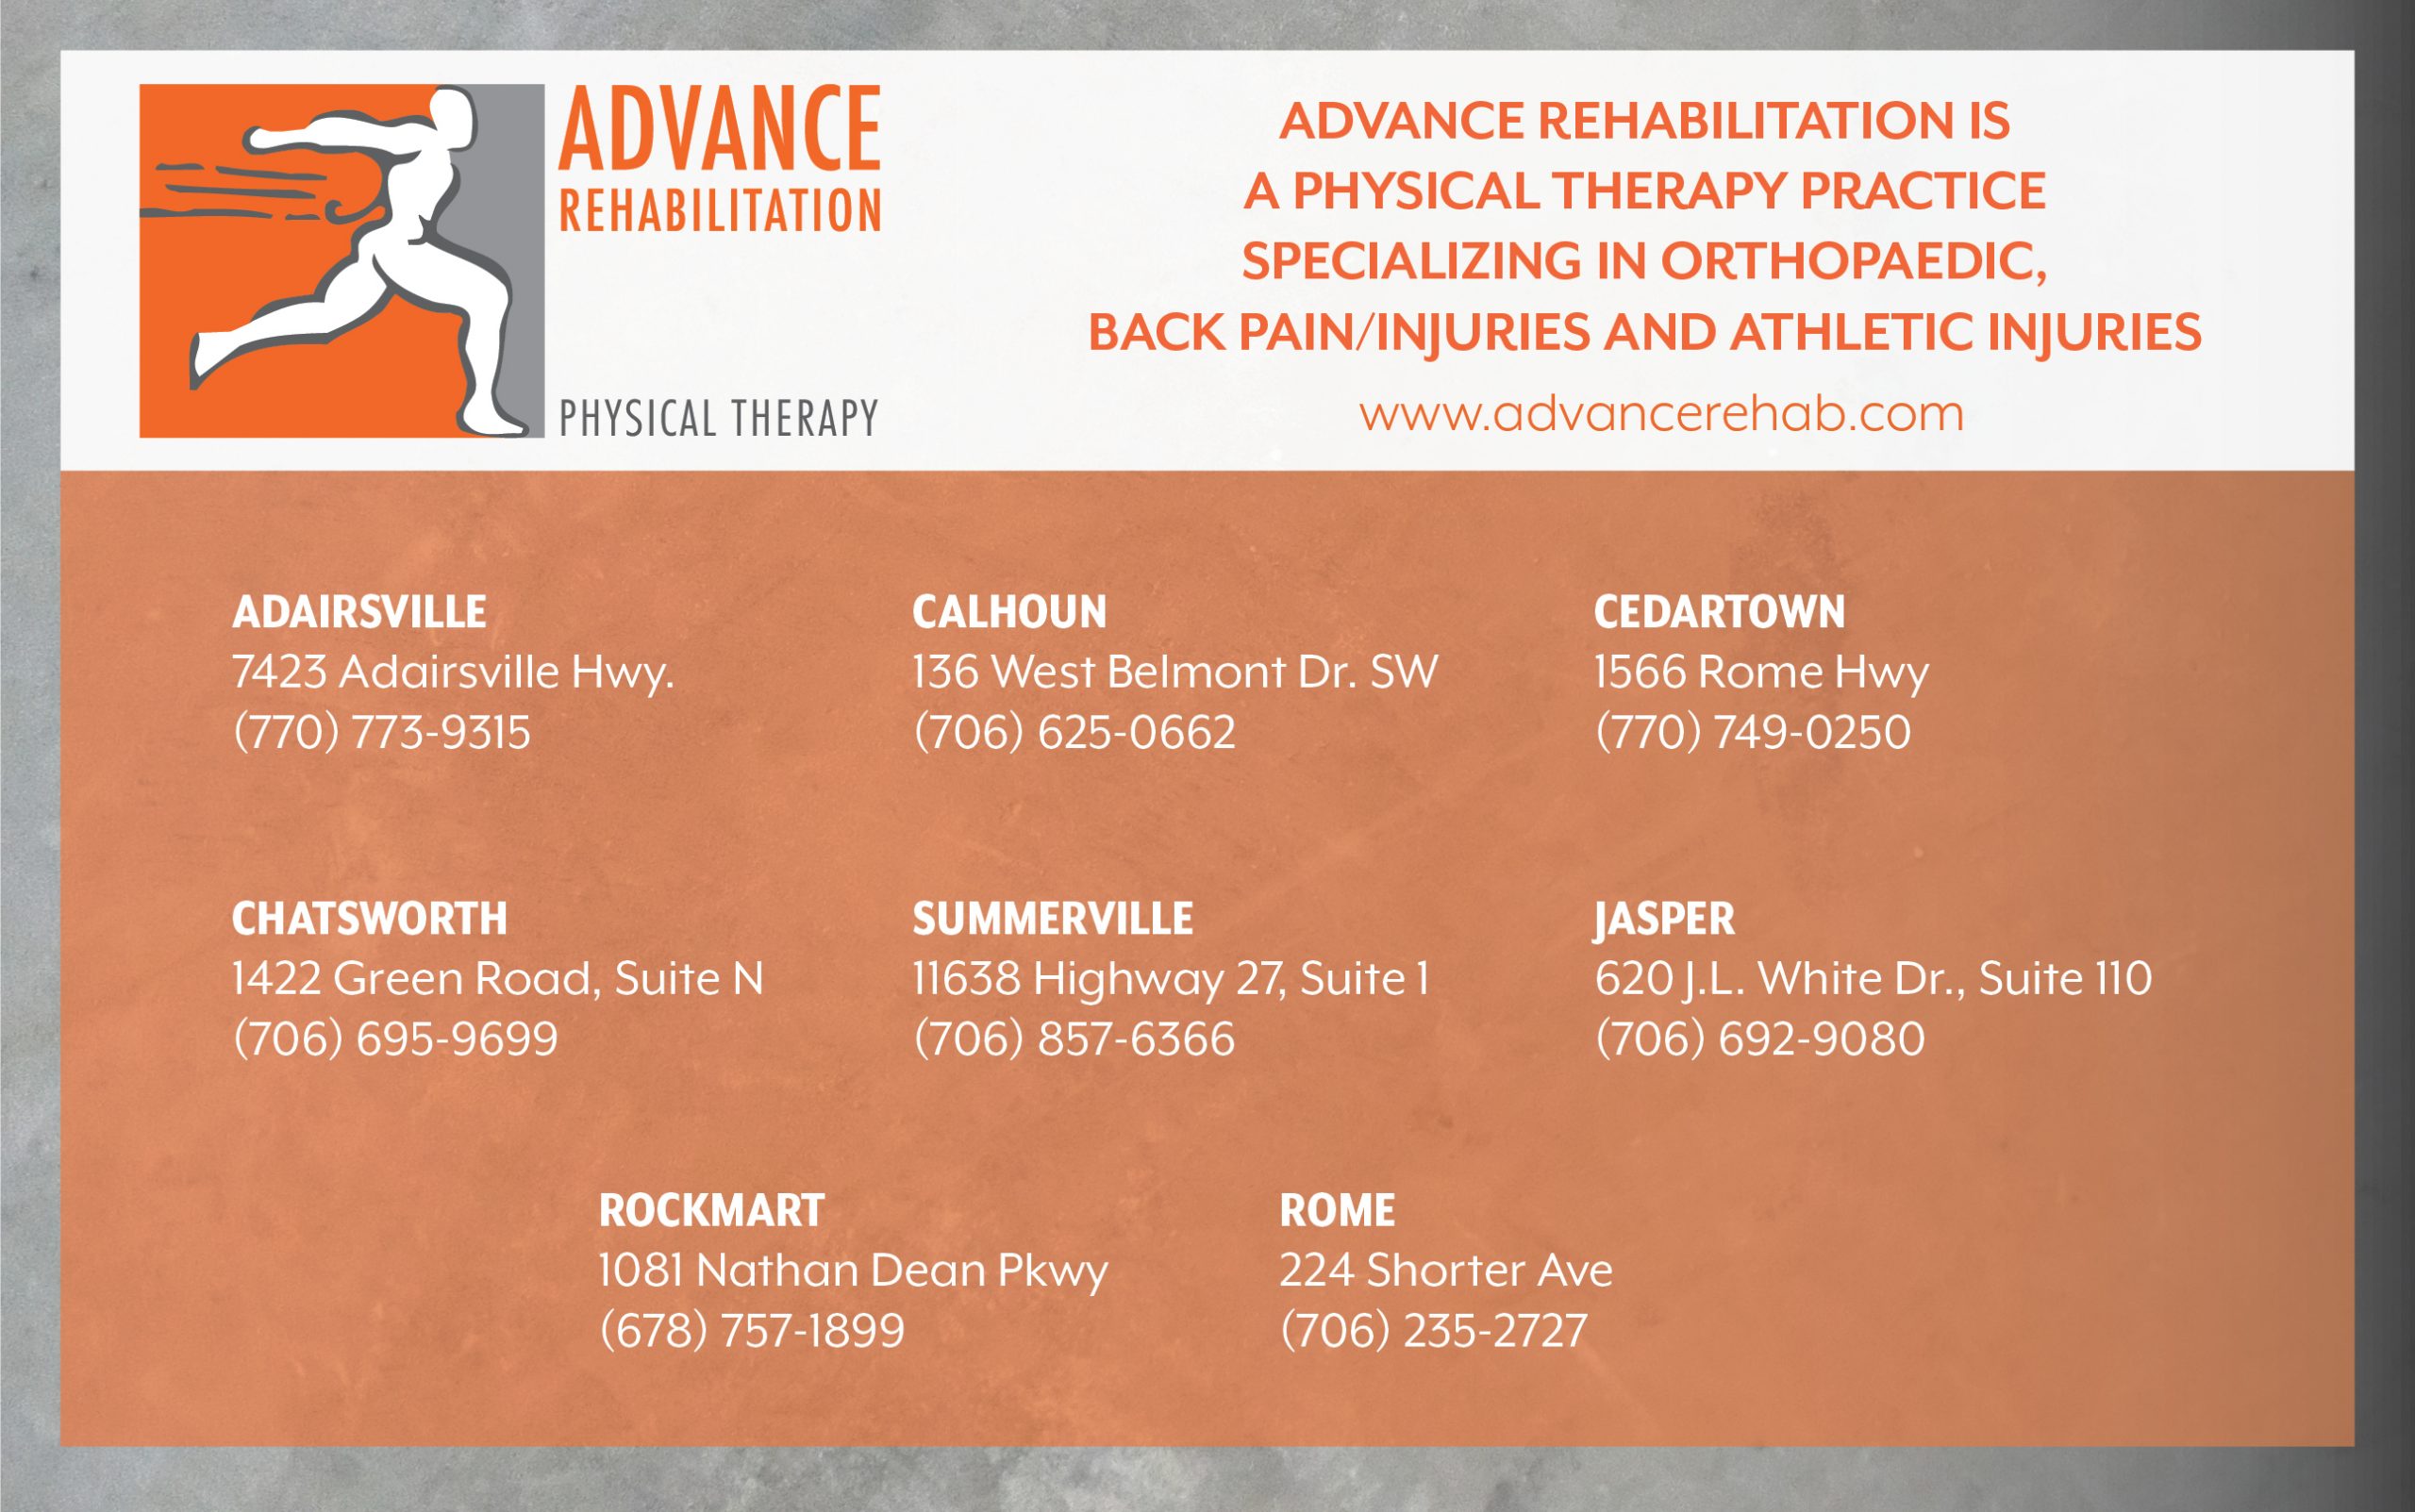 advance rehab, rome, physical therapy